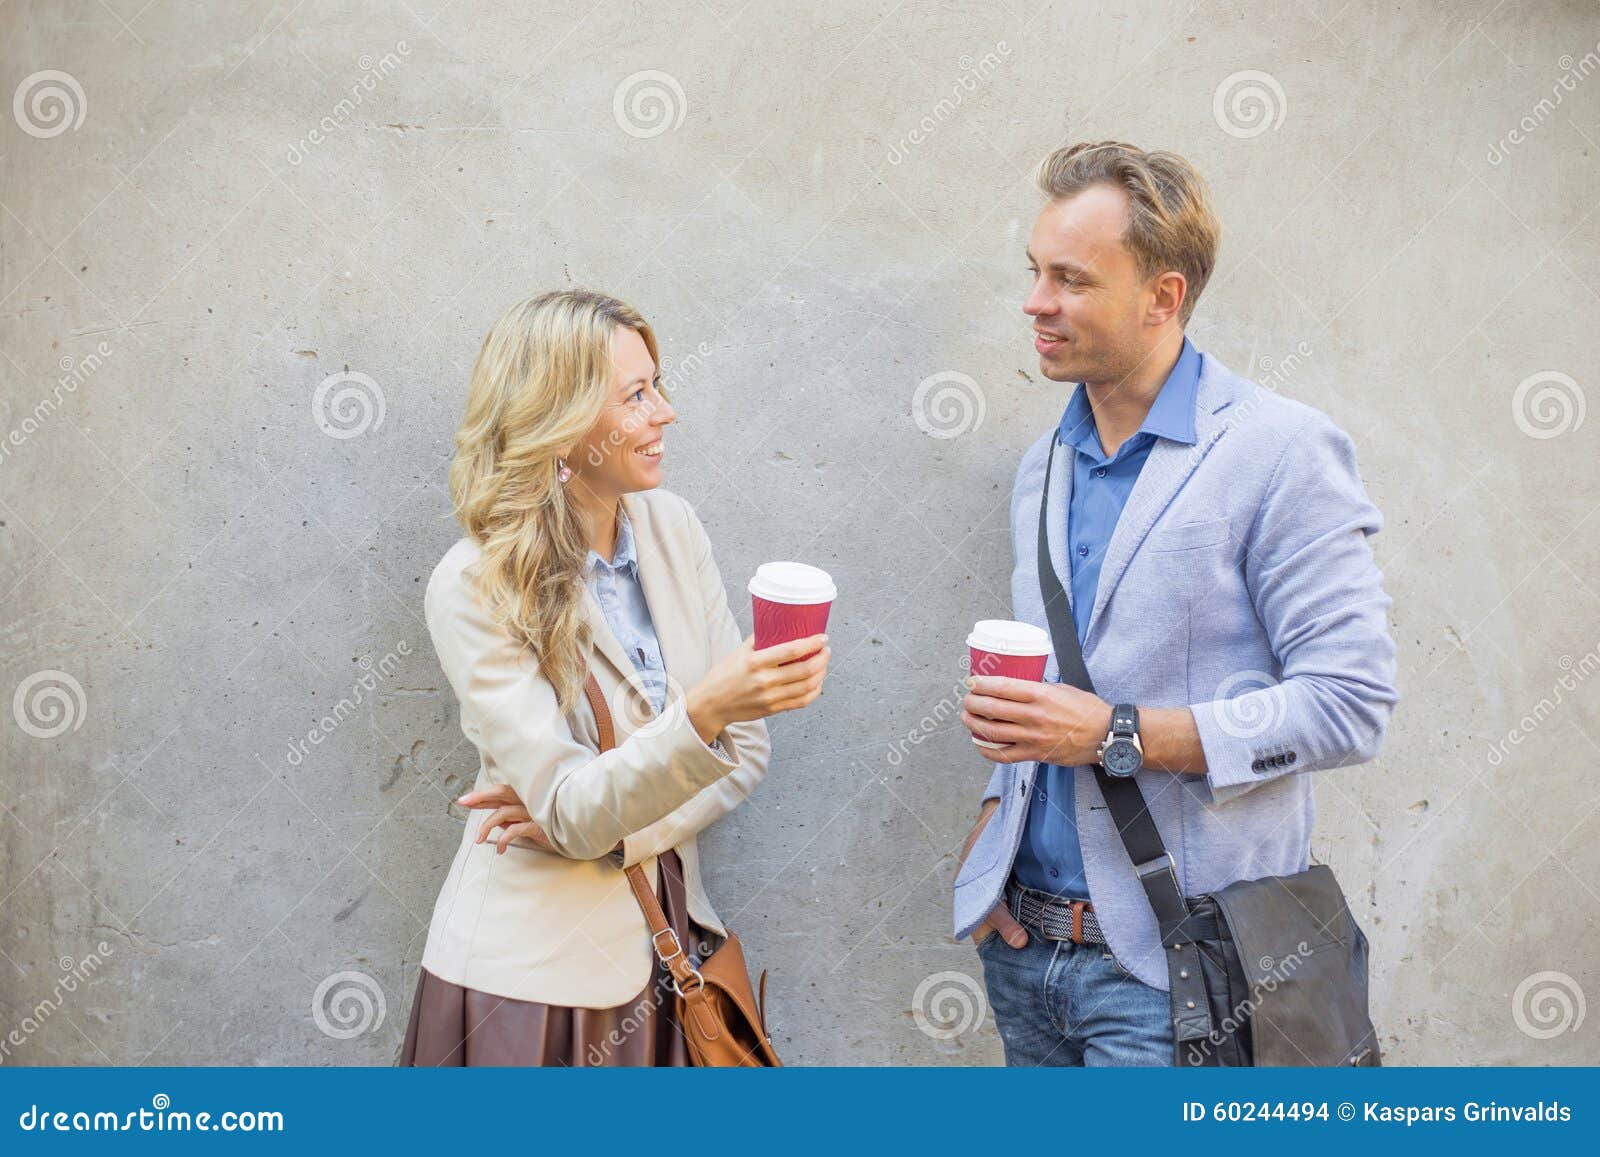 man and woman having a conversation